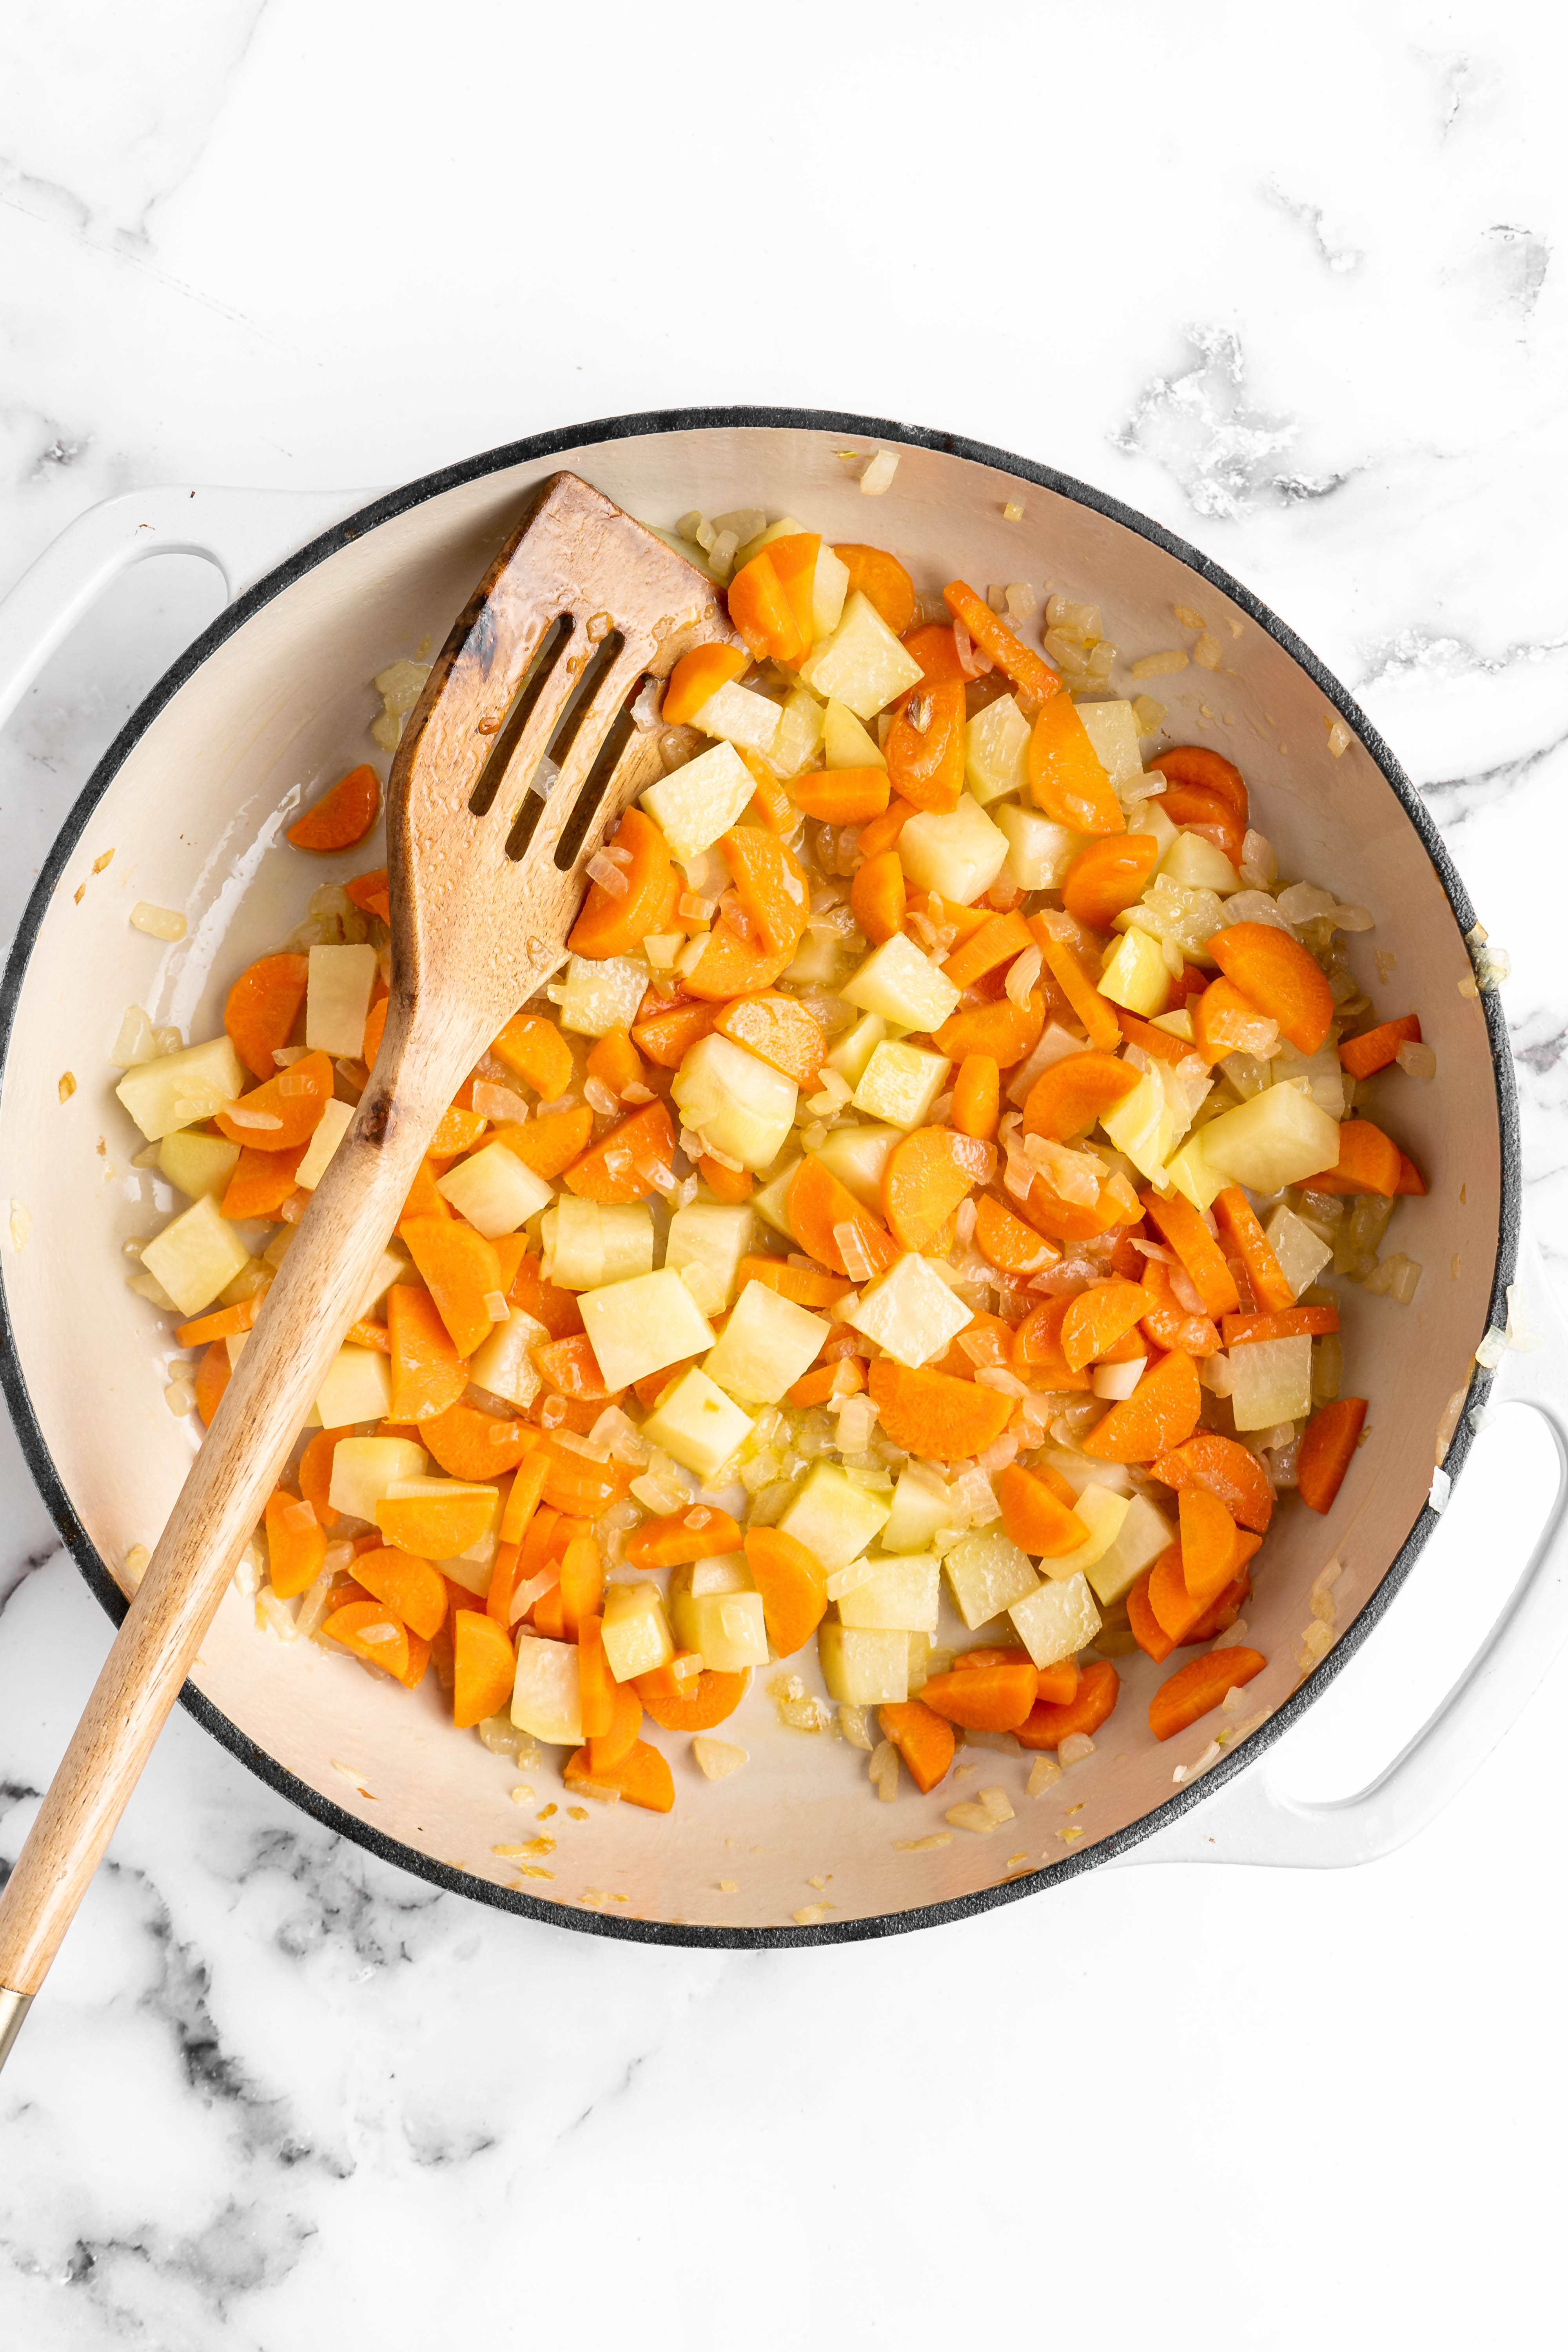 Carrots, potatoes, and onions in pan